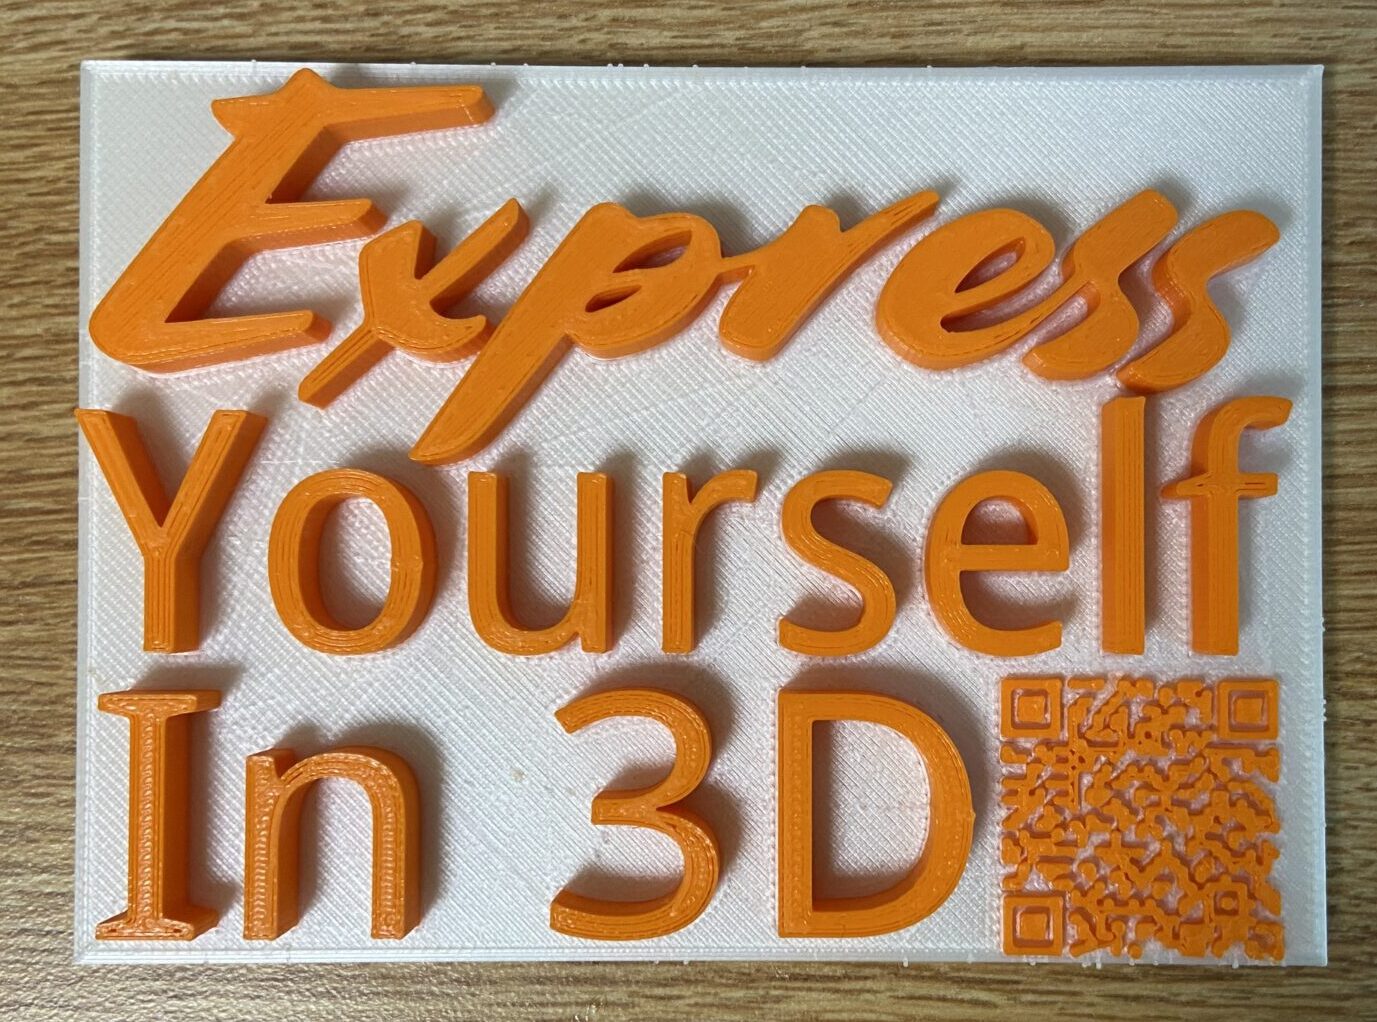 A 3D printed piece that says "Express yourself in 3D" and has a QR code 